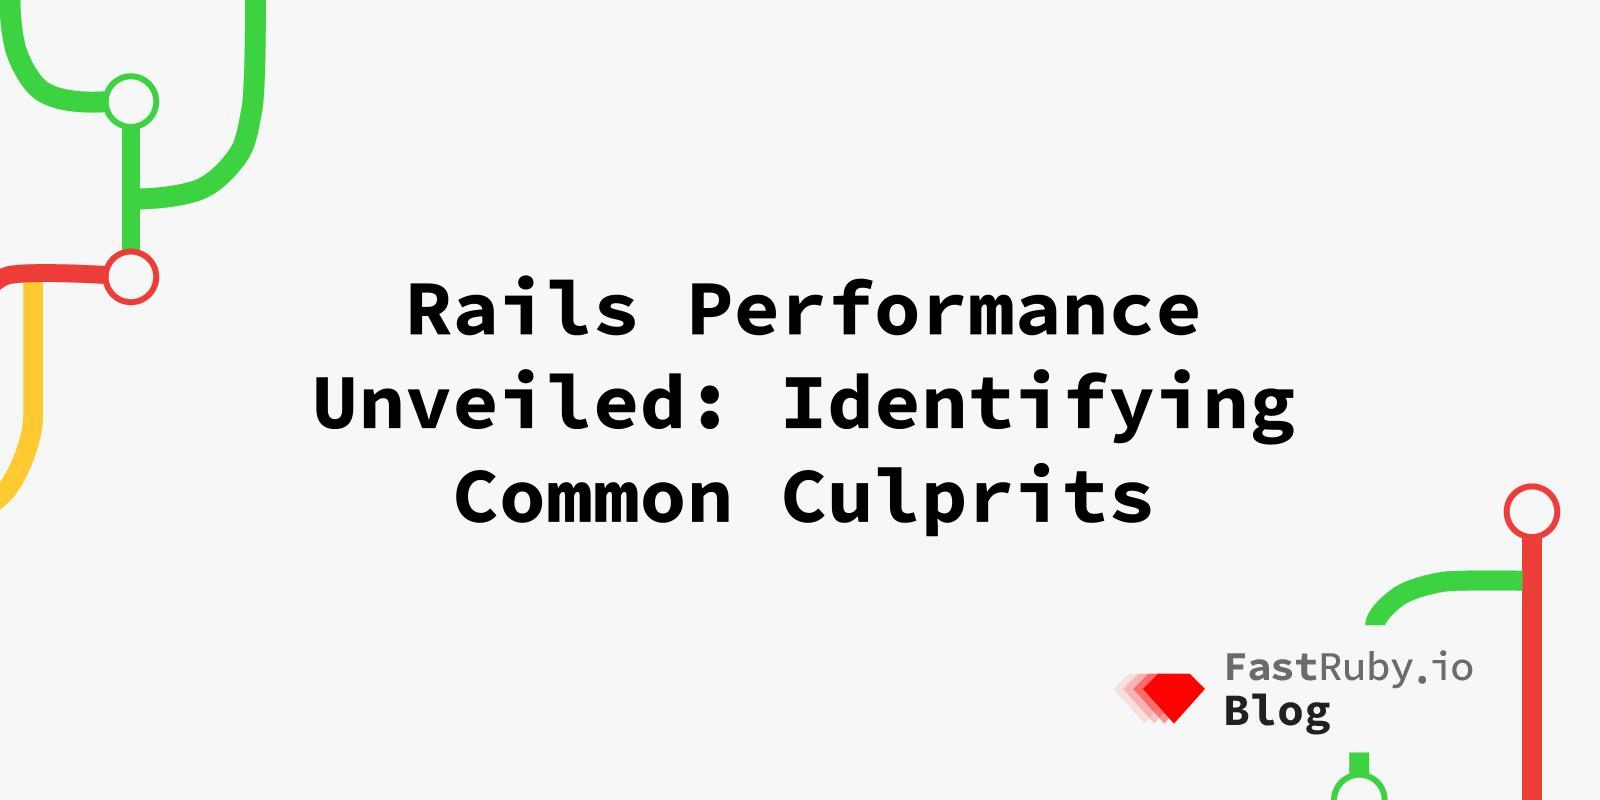 Rails Performance Unveiled: Identifying Common Culprits